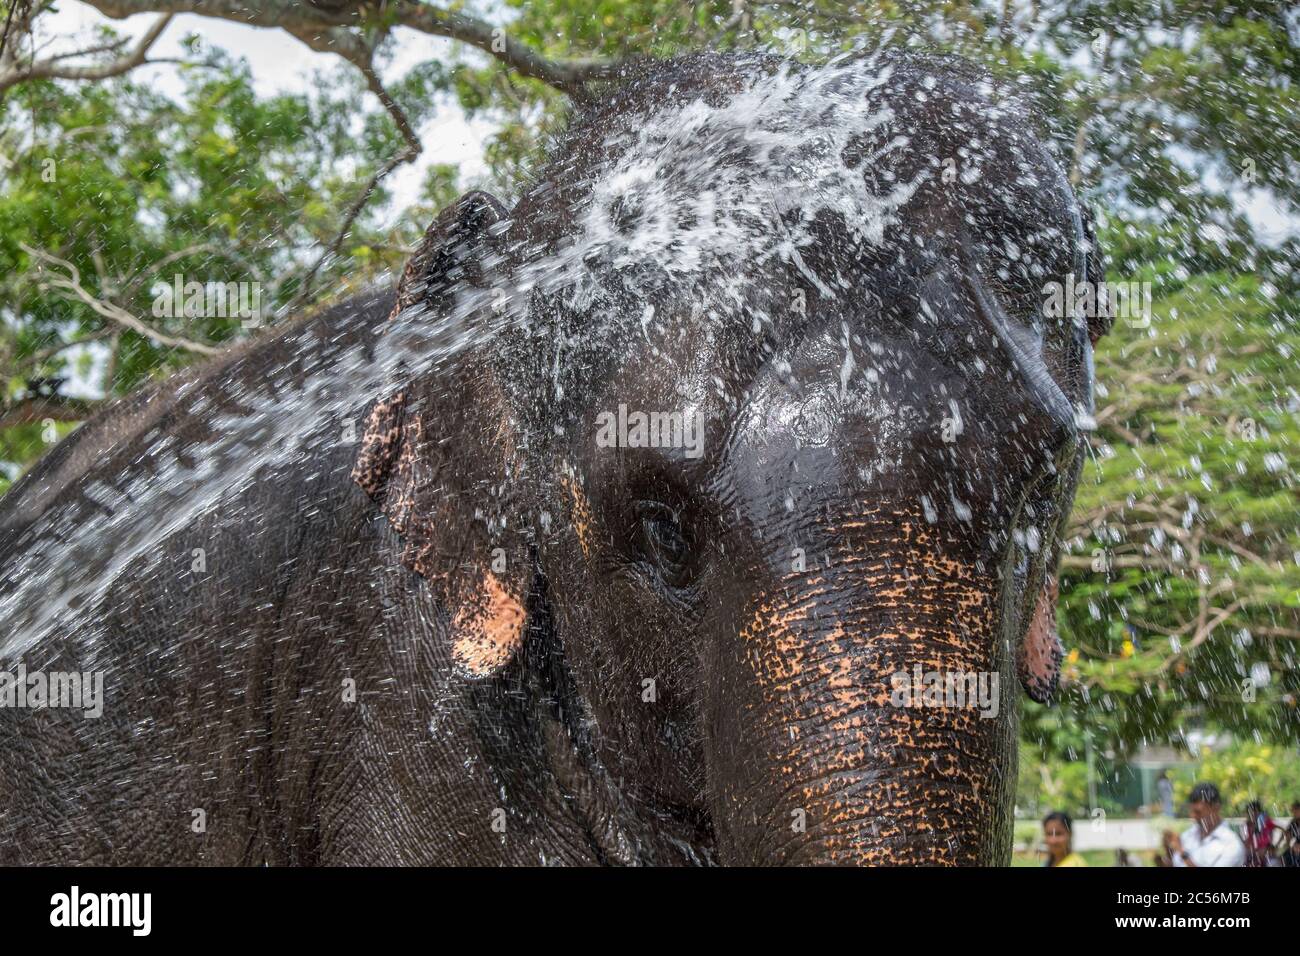 Elephant is sprayed with a water steel for refreshment and cleaning Stock Photo